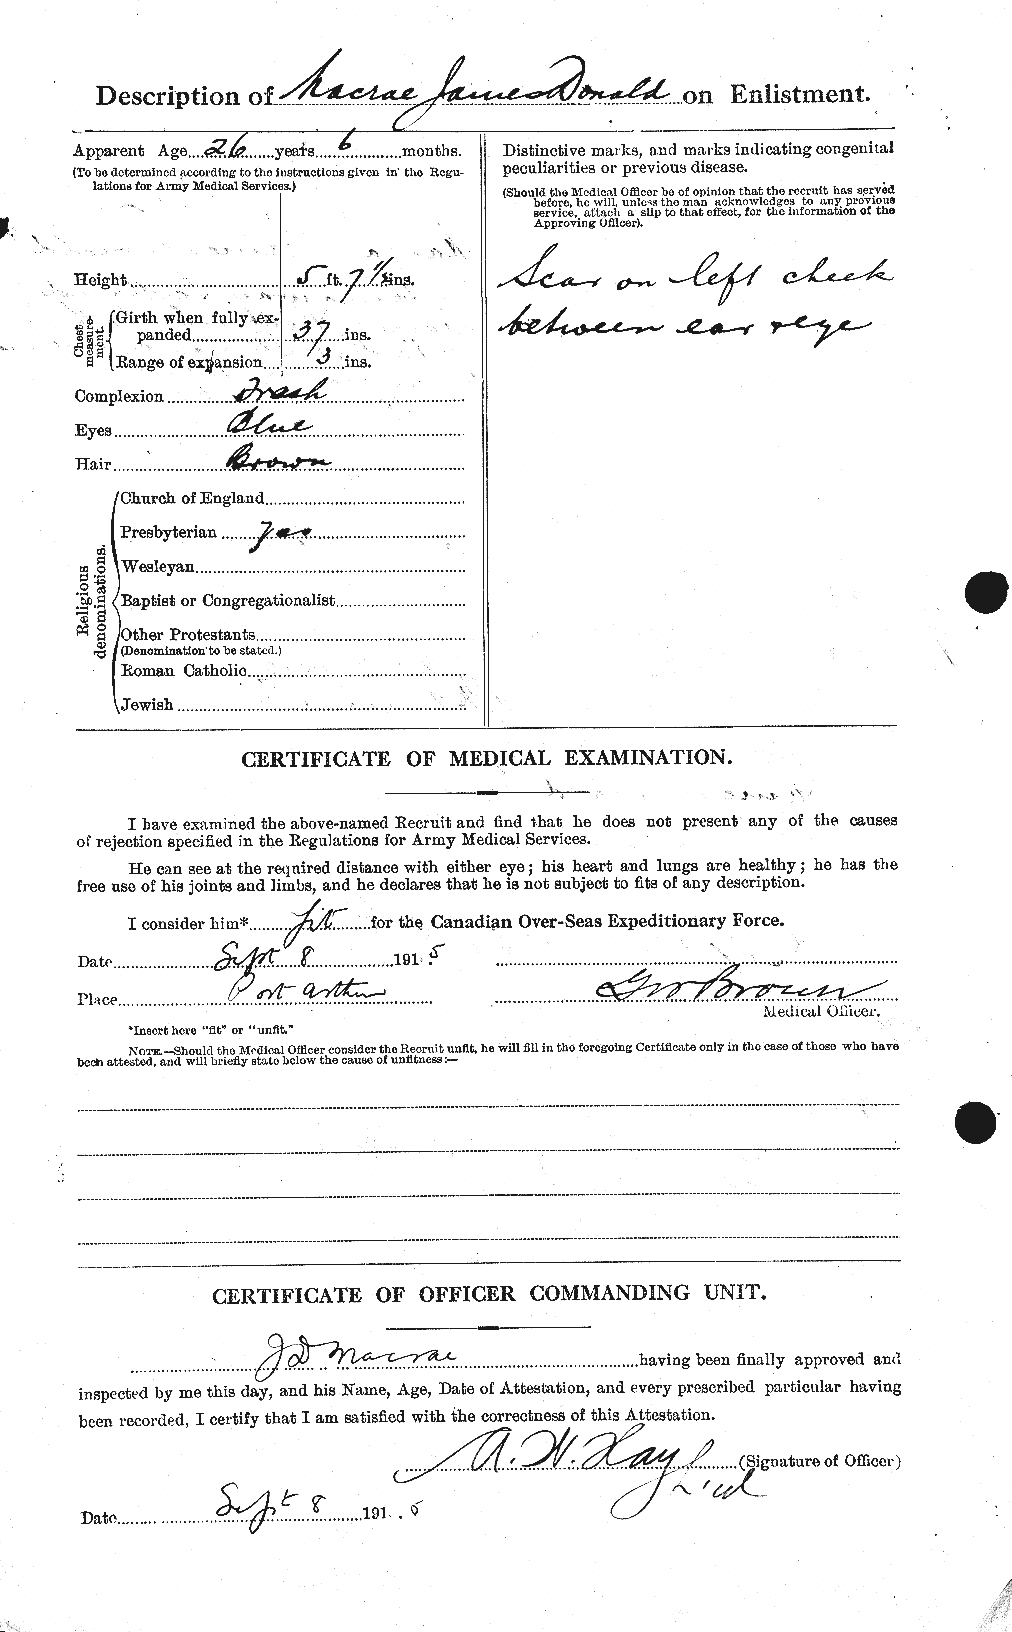 Personnel Records of the First World War - CEF 542783b